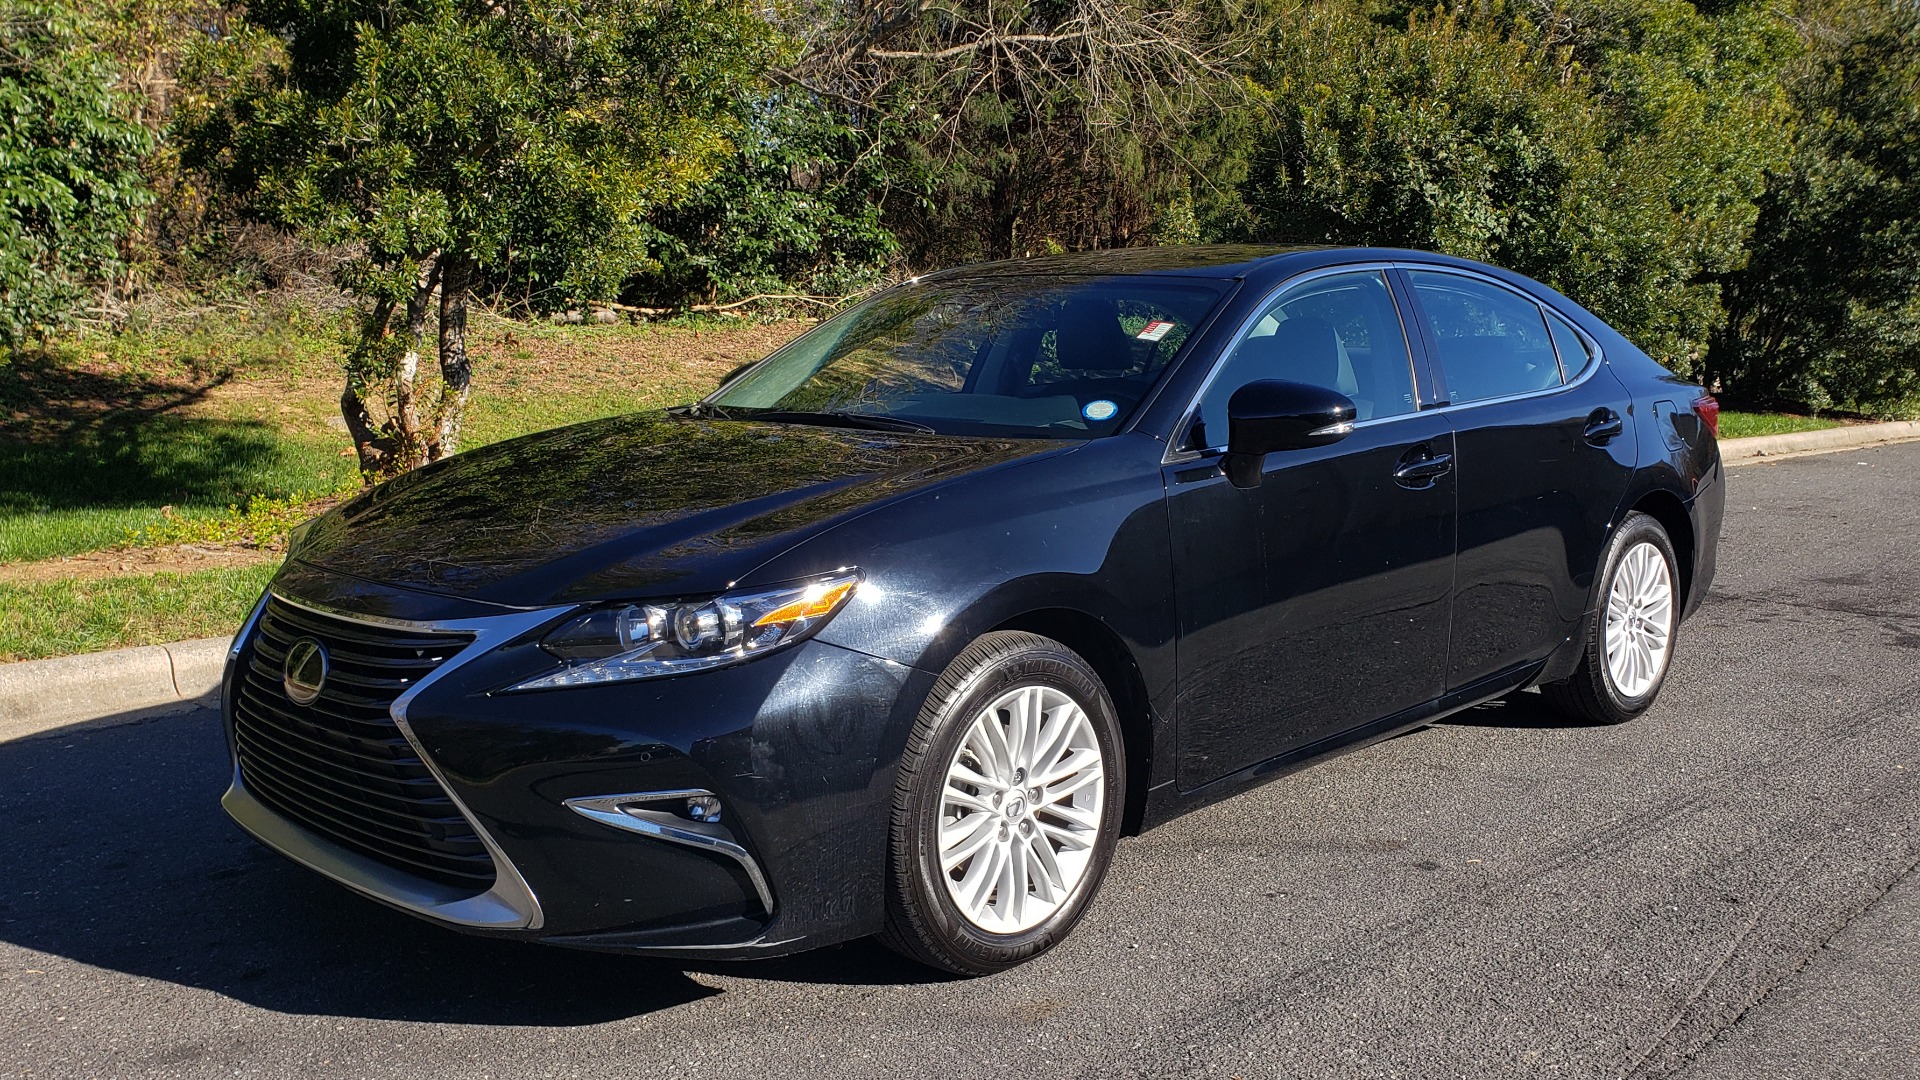 Used 2017 Lexus ES 350 PREMIUM / NAV / SUNROOF / BSM / VENT STS / REARVIEW for sale Sold at Formula Imports in Charlotte NC 28227 1